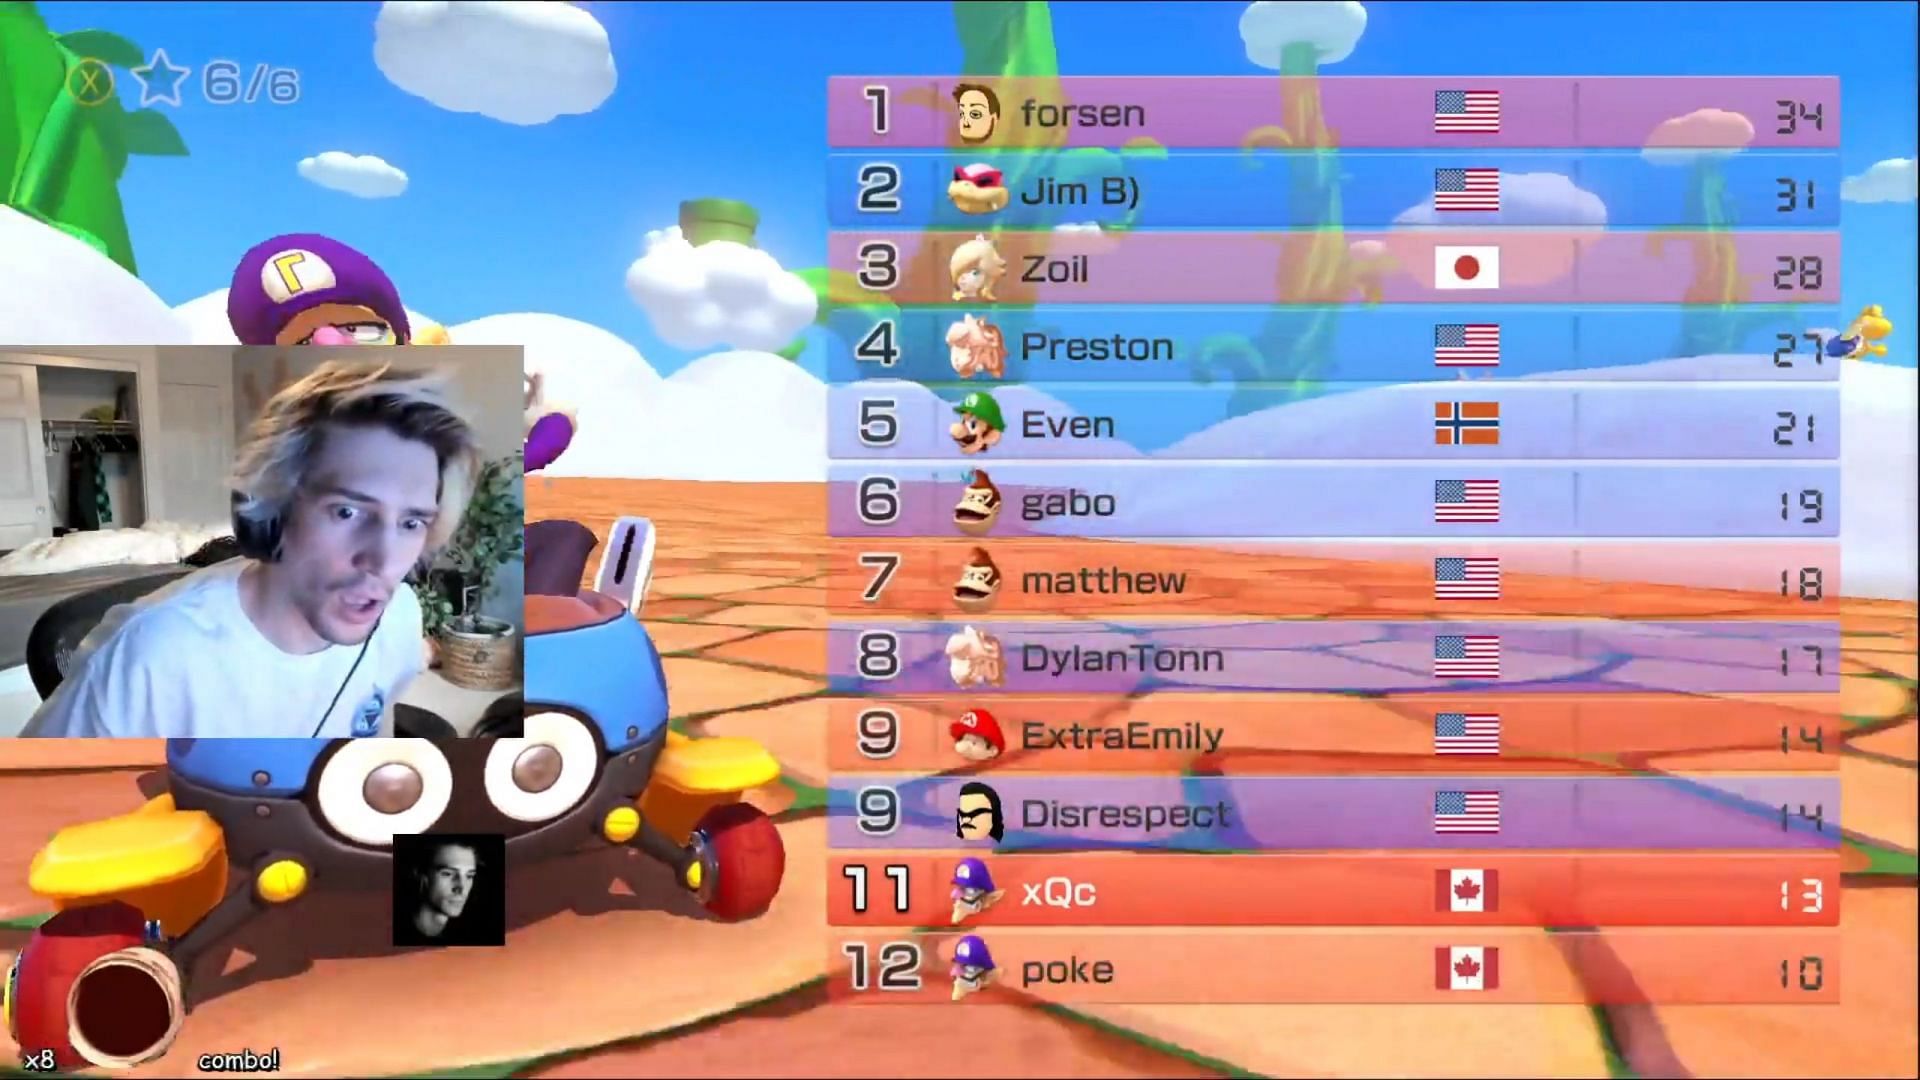 xQc loses a race in Mario Kart 8 in the most unexpected manner (Images via xQcOW/Twitch)